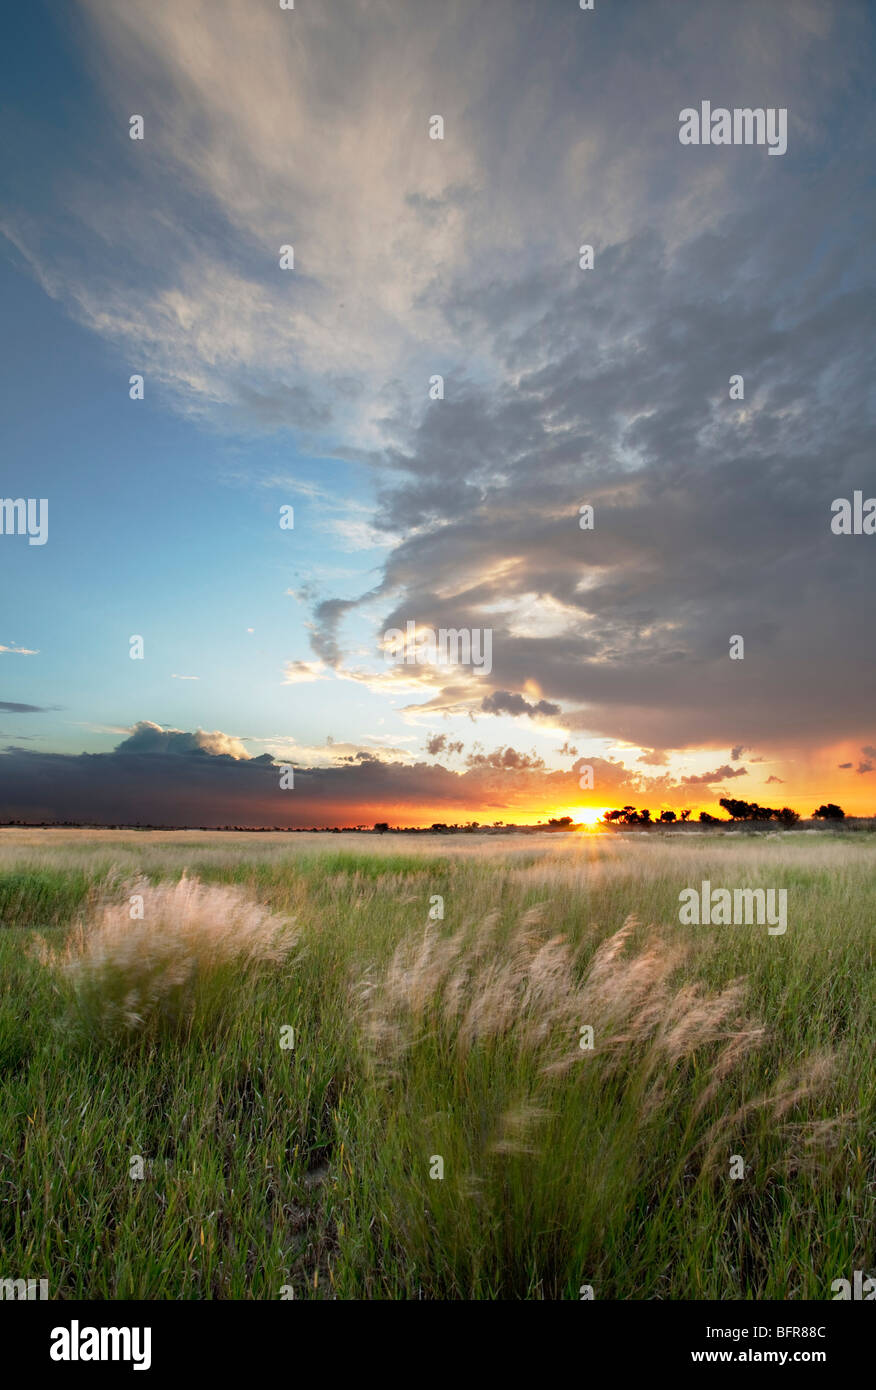 Landscape with sunset over waving grass Stock Photo